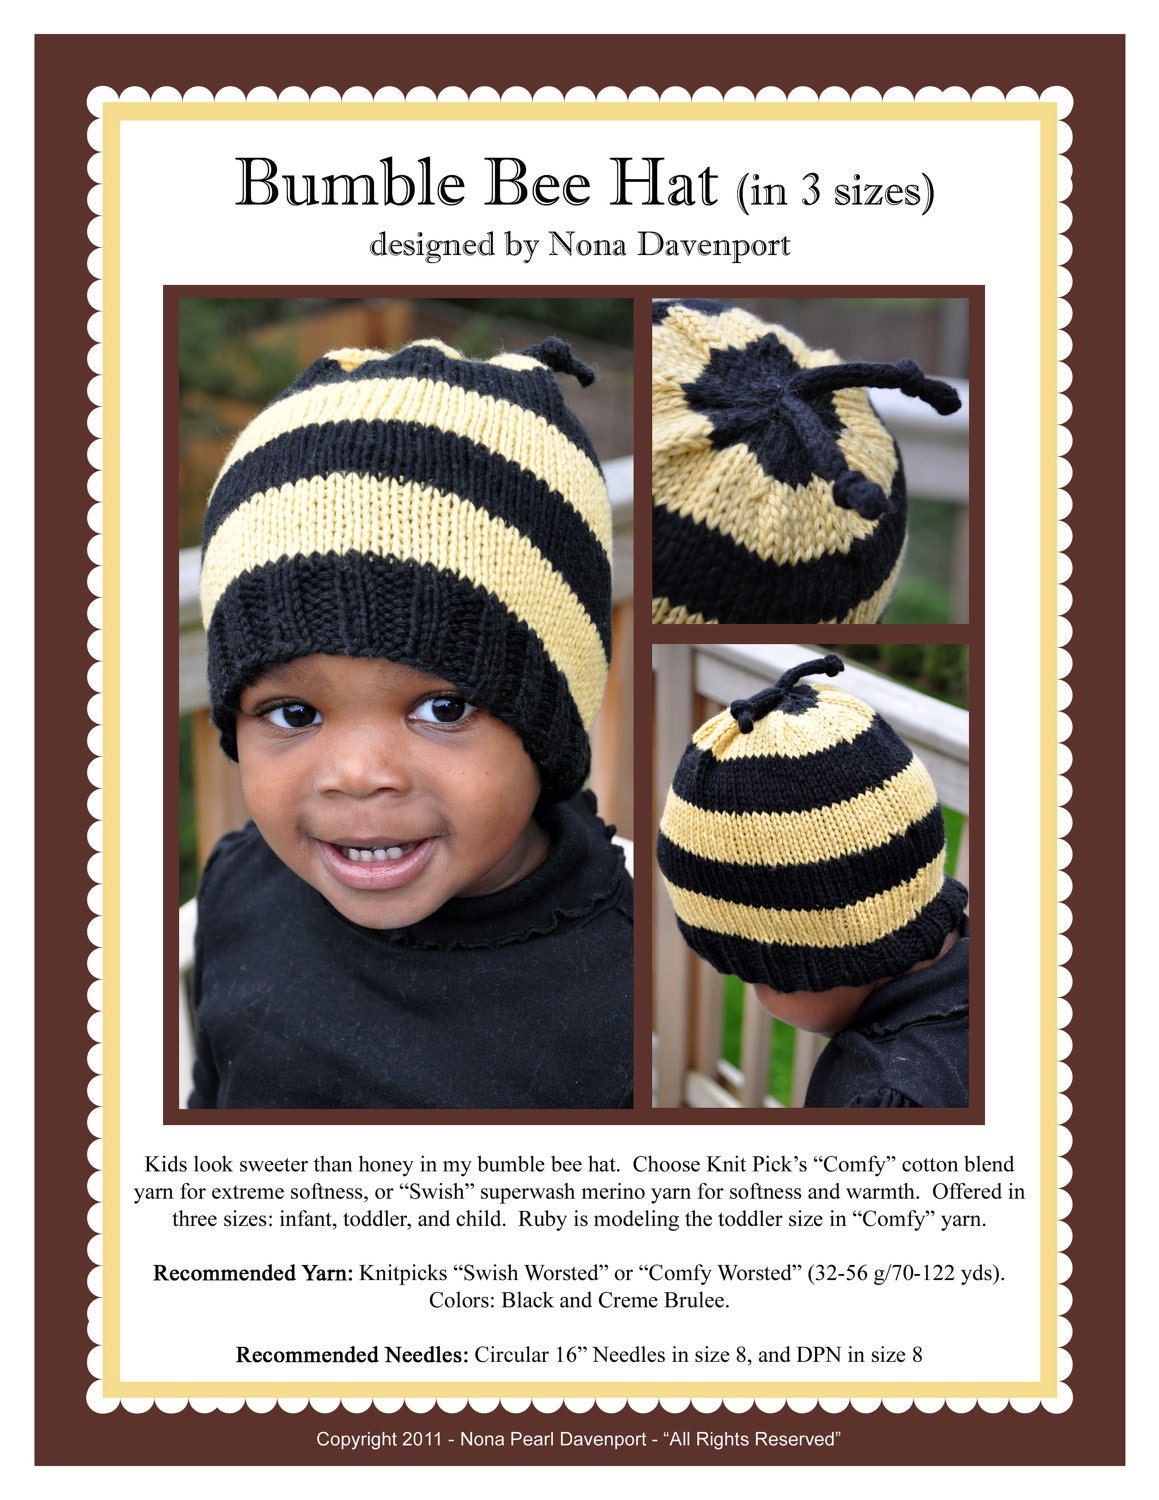 Bumble Bee Hat (in 3 sizes) Pattern PDF